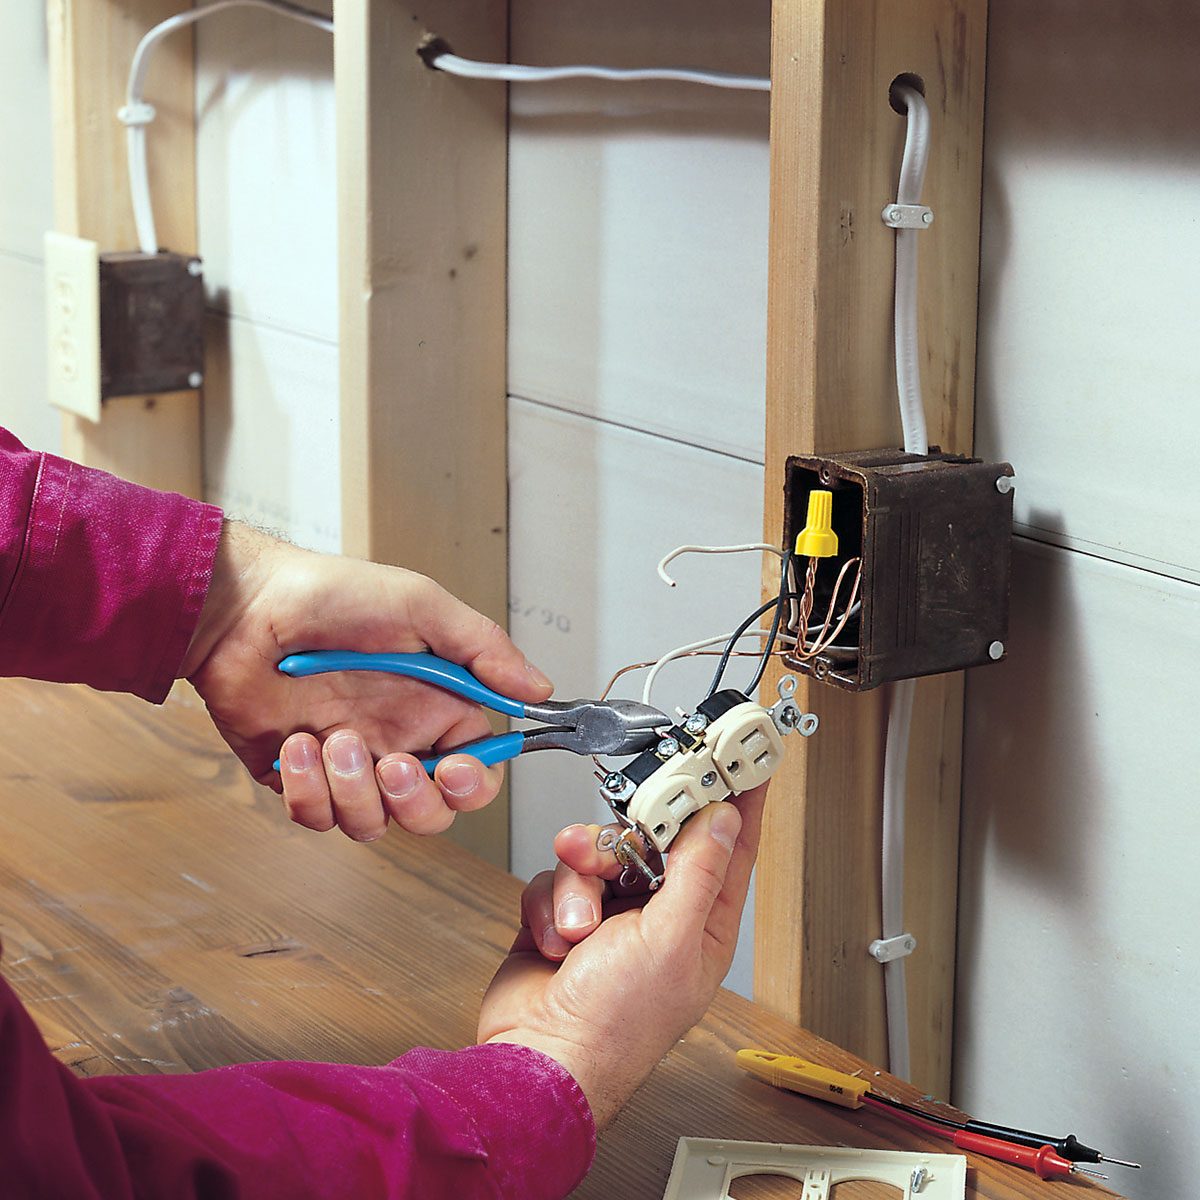 Person repairing the outlet with tools